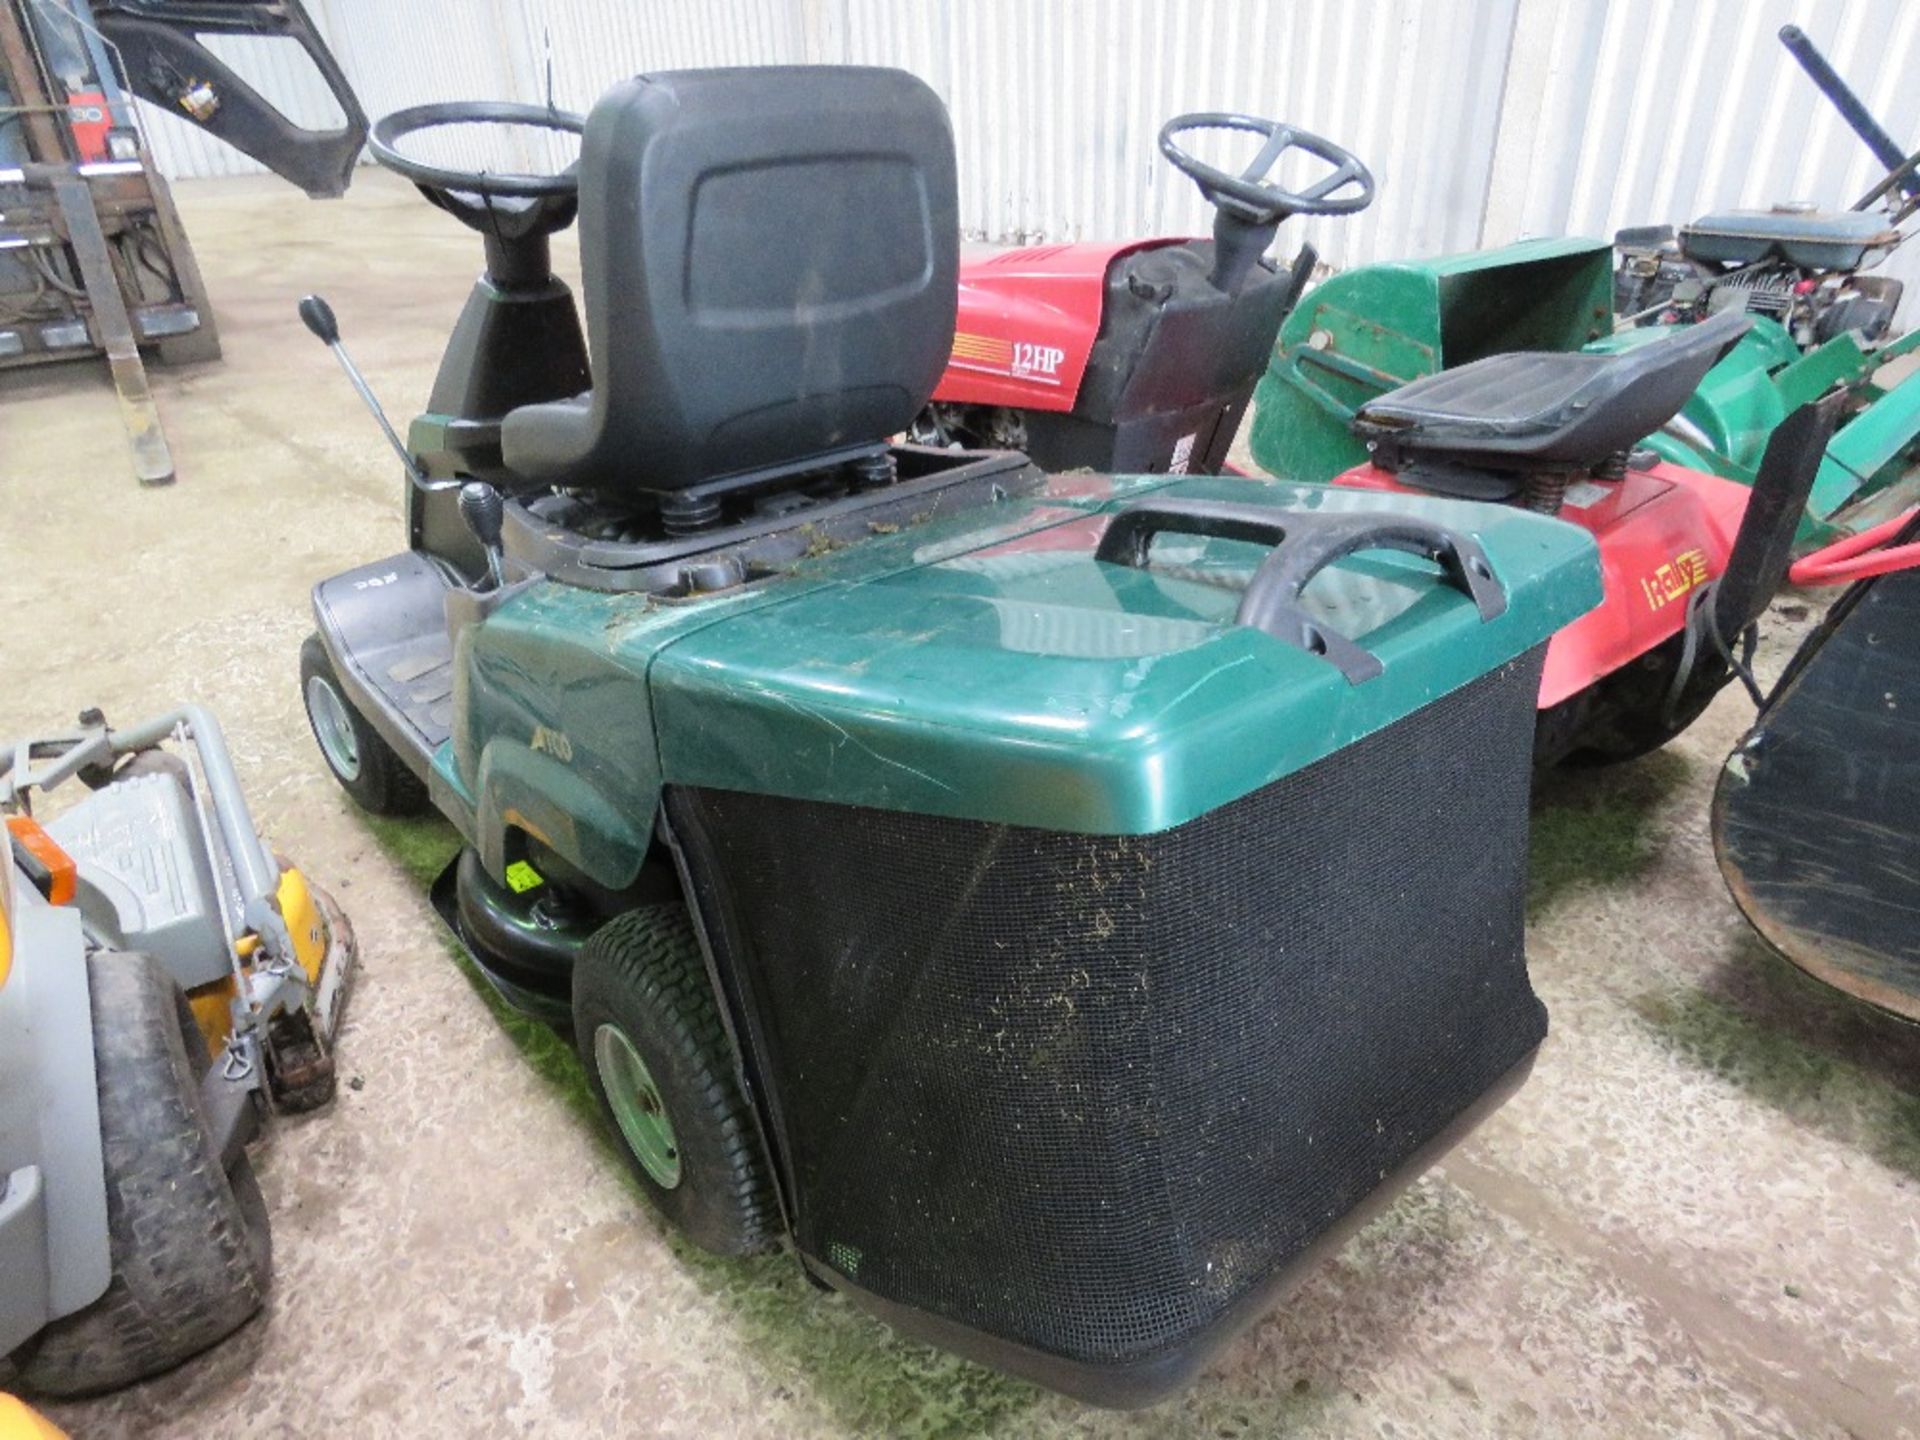 ATCO RIDER RIDE ON MOWER WITH COLLECTOR. WHEN BRIEFLY TESTED WAS SEEN TO RUN, DRIVE AND MOWERS ENGAG - Image 4 of 6